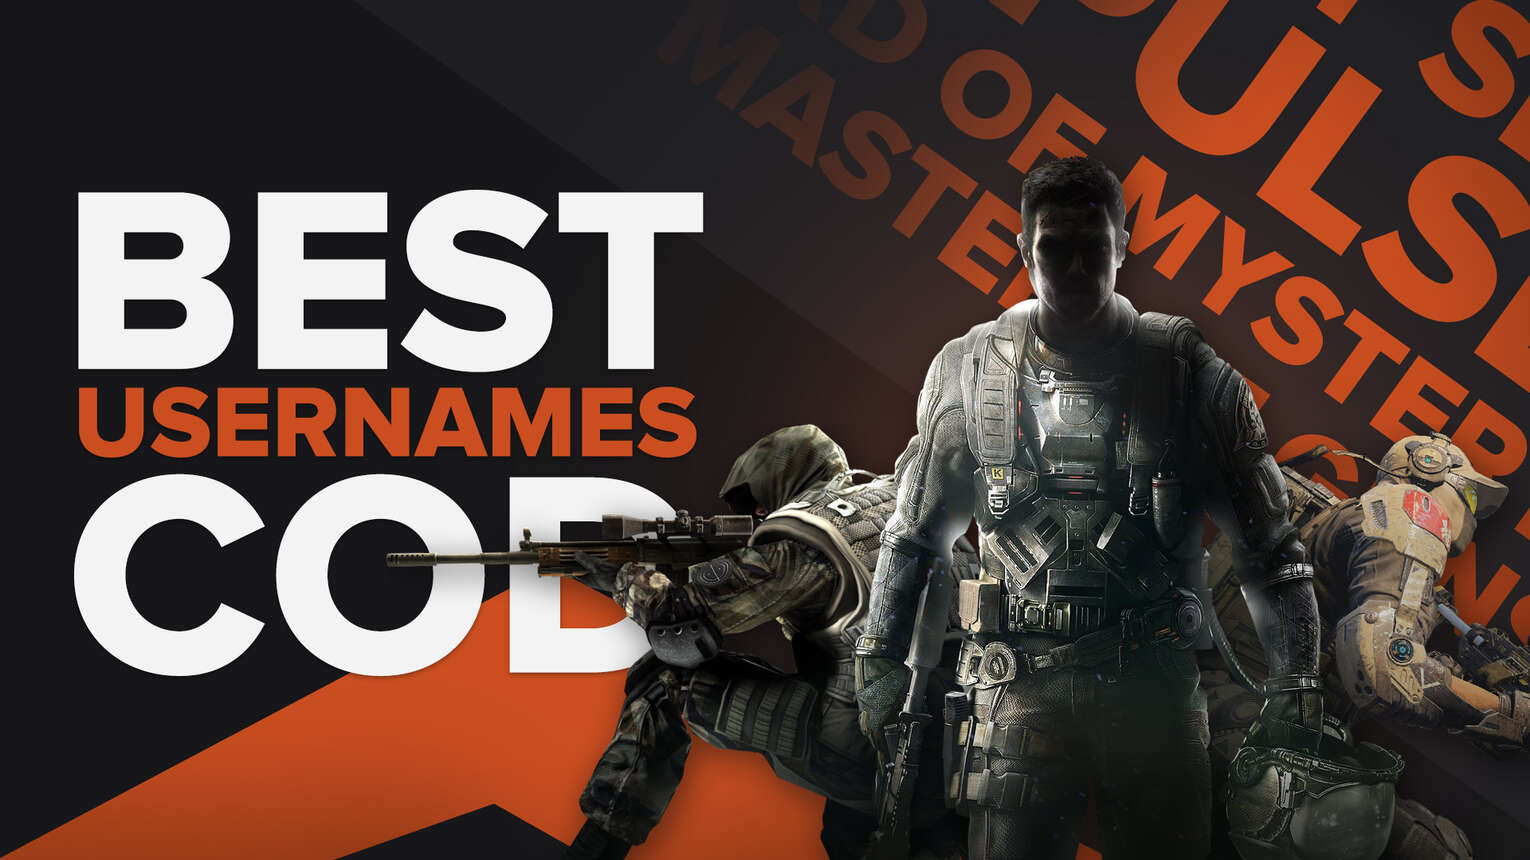 100 Best Usernames to Use in Call of Duty [With Funny Ones]